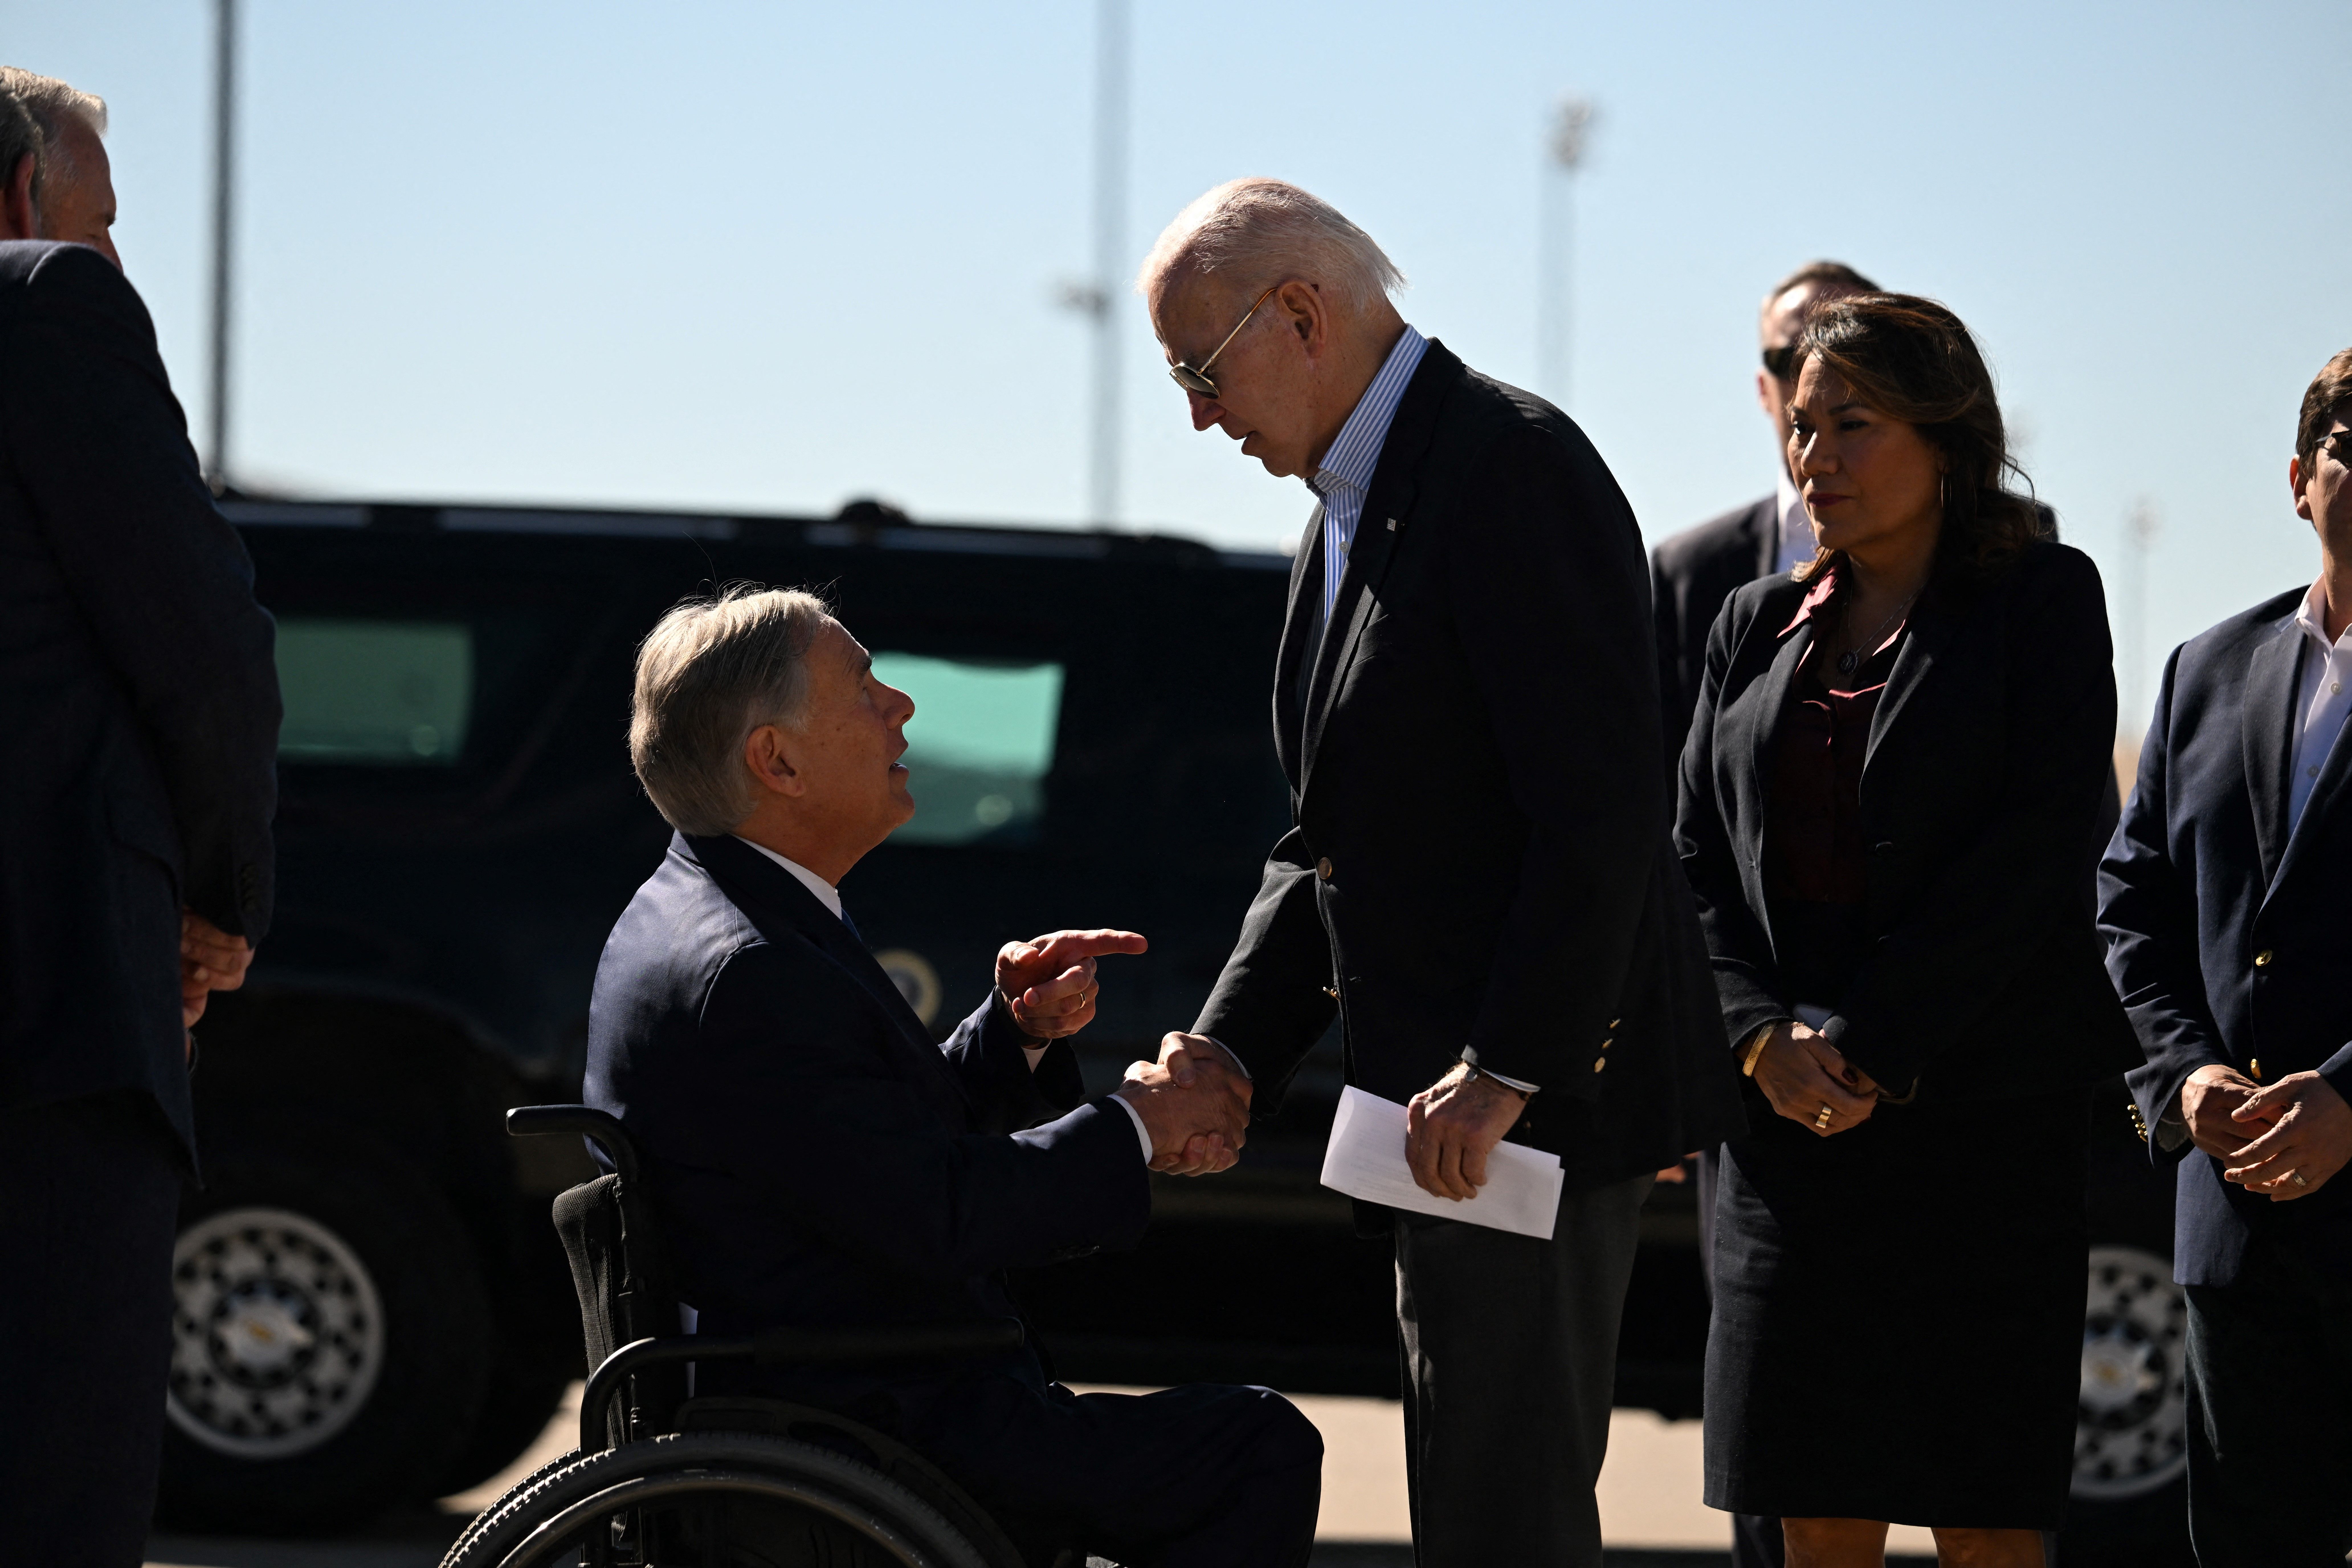 US President Joe Biden shakes hands with Texas Governor Greg Abbott after Abbott handed him a letter outlining the problems on the southern border upon arrival at El Paso International Airport in El Paso, Texas, on January 8, 2023. (Photo by Jim WATSON / AFP) (Photo by JIM WATSON/AFP via Getty Images)